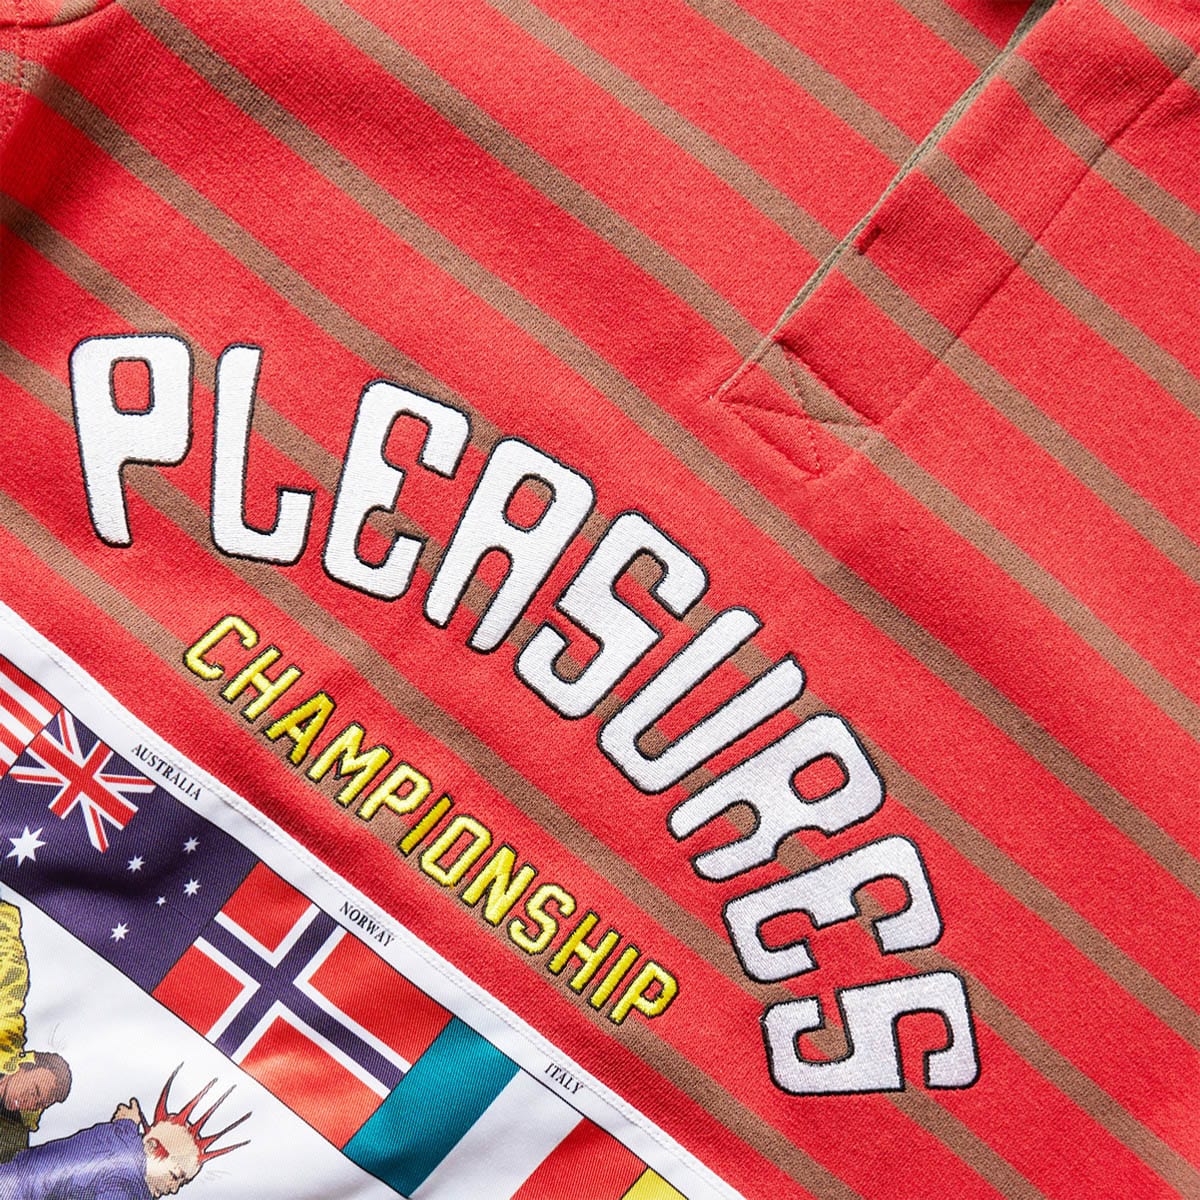 Pleasures Shirts CHAMPIONSHIP RUGBY LONG SLEEVE